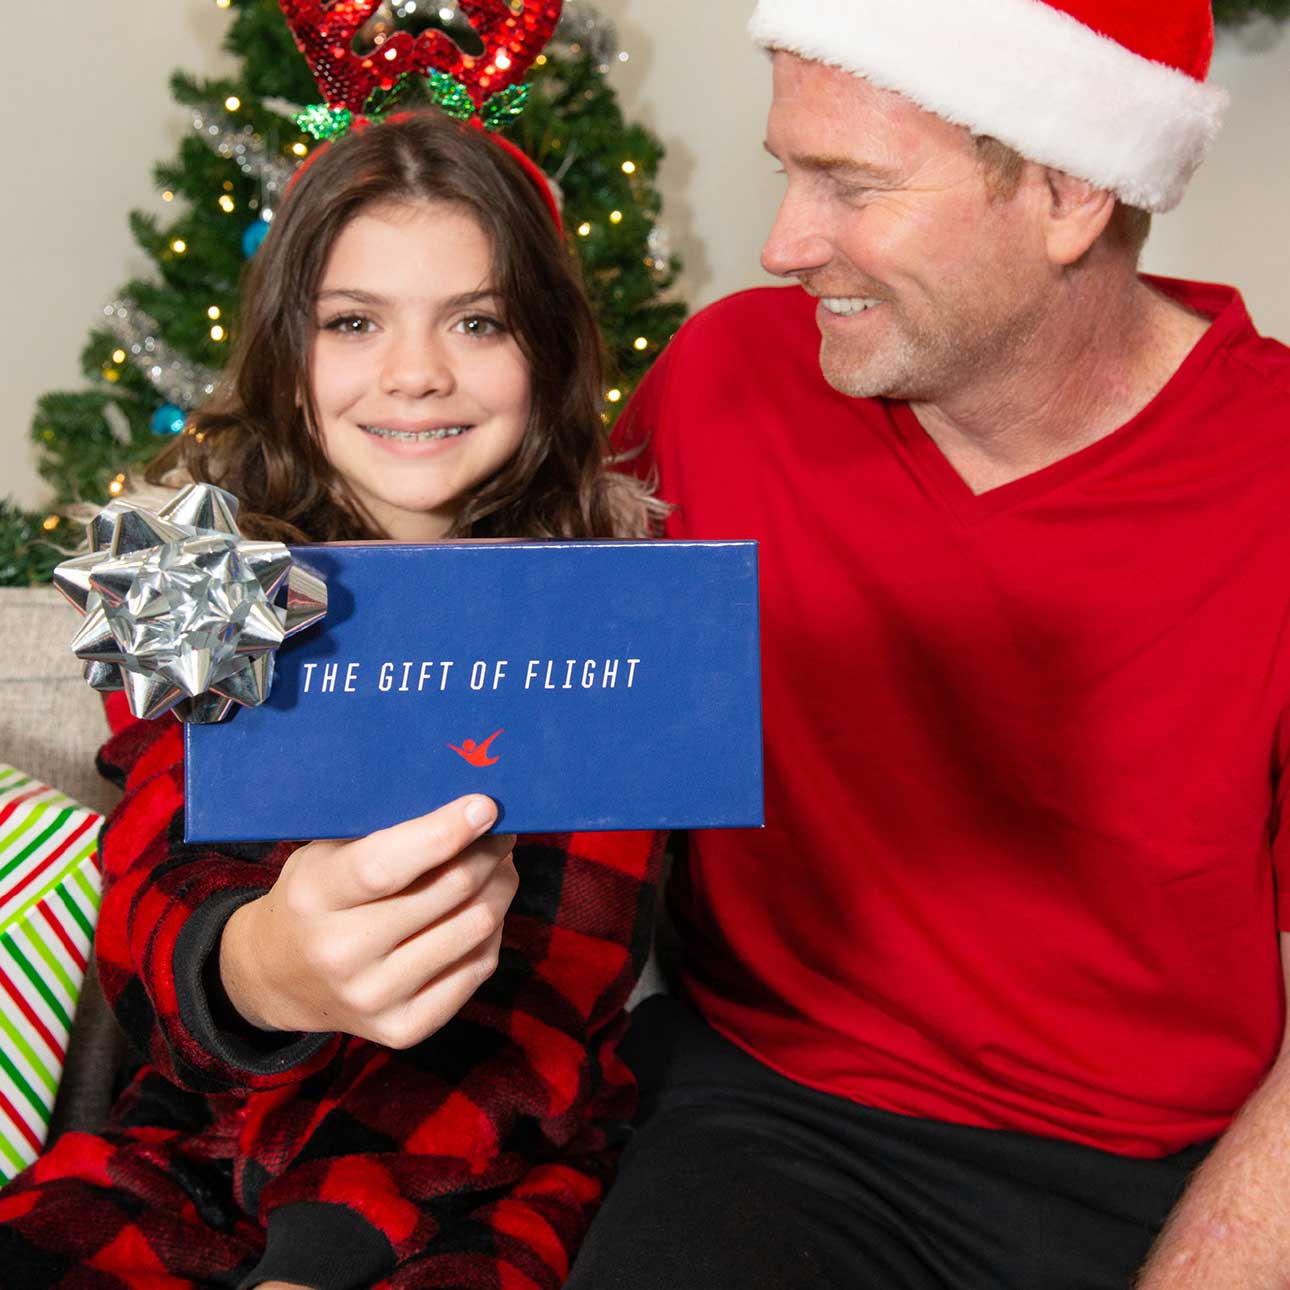 iFLY Holiday Gift Vouchers – Save up to 35% for a limited time